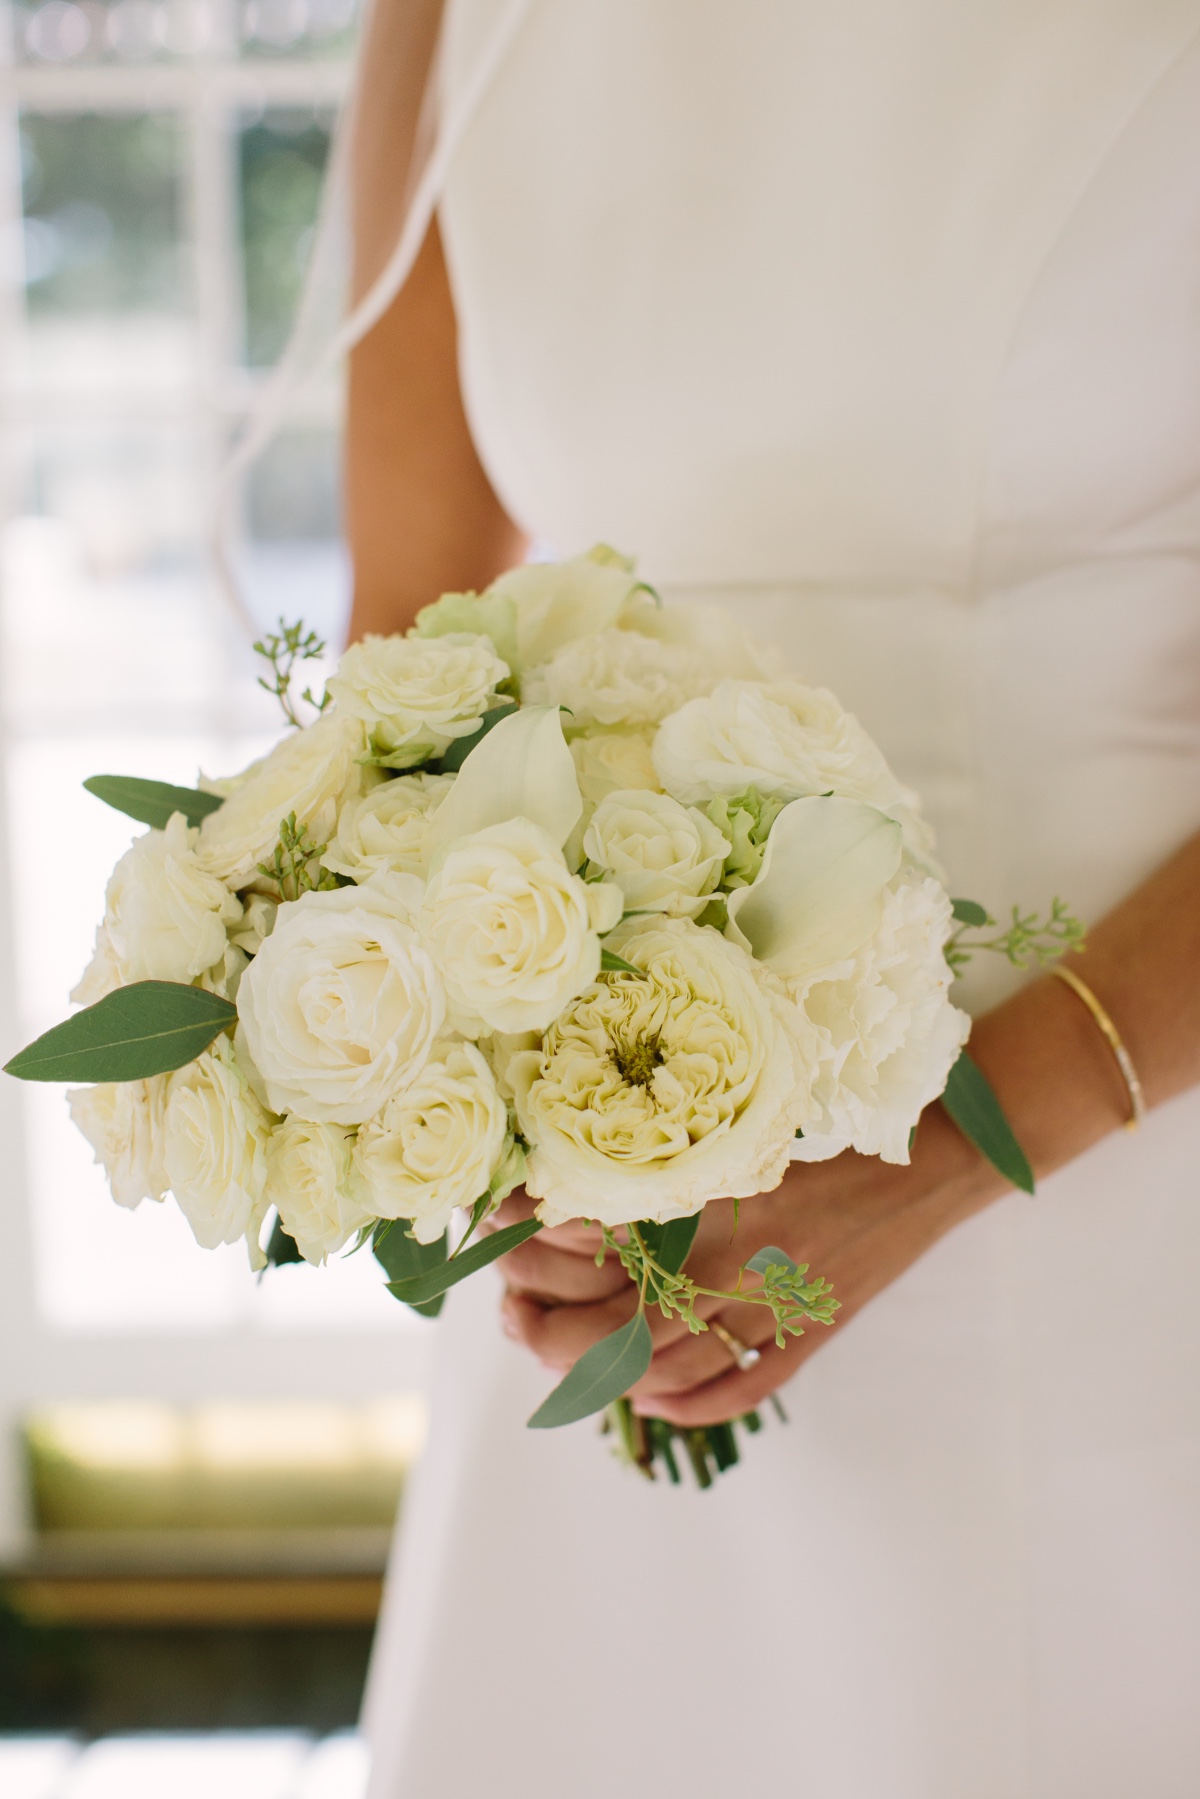 How Wedding Florals Tell a Love Story